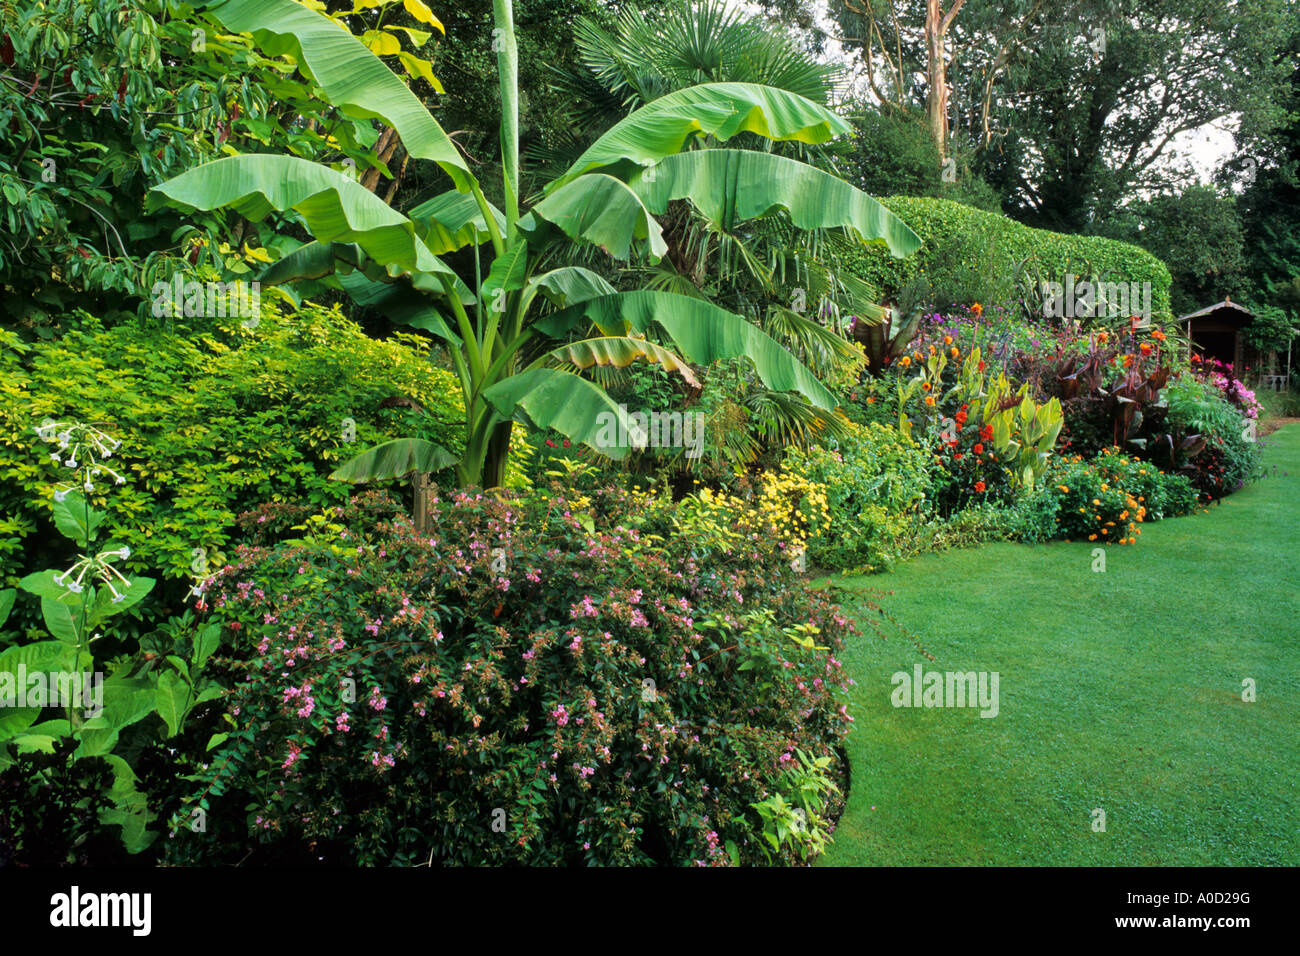 SUB-TROPICAL PLANTING WITH PERFECT LAWN AT KNOLL GARDEN DORSET WITH PALMS BANANA AND CANNA Stock Photo